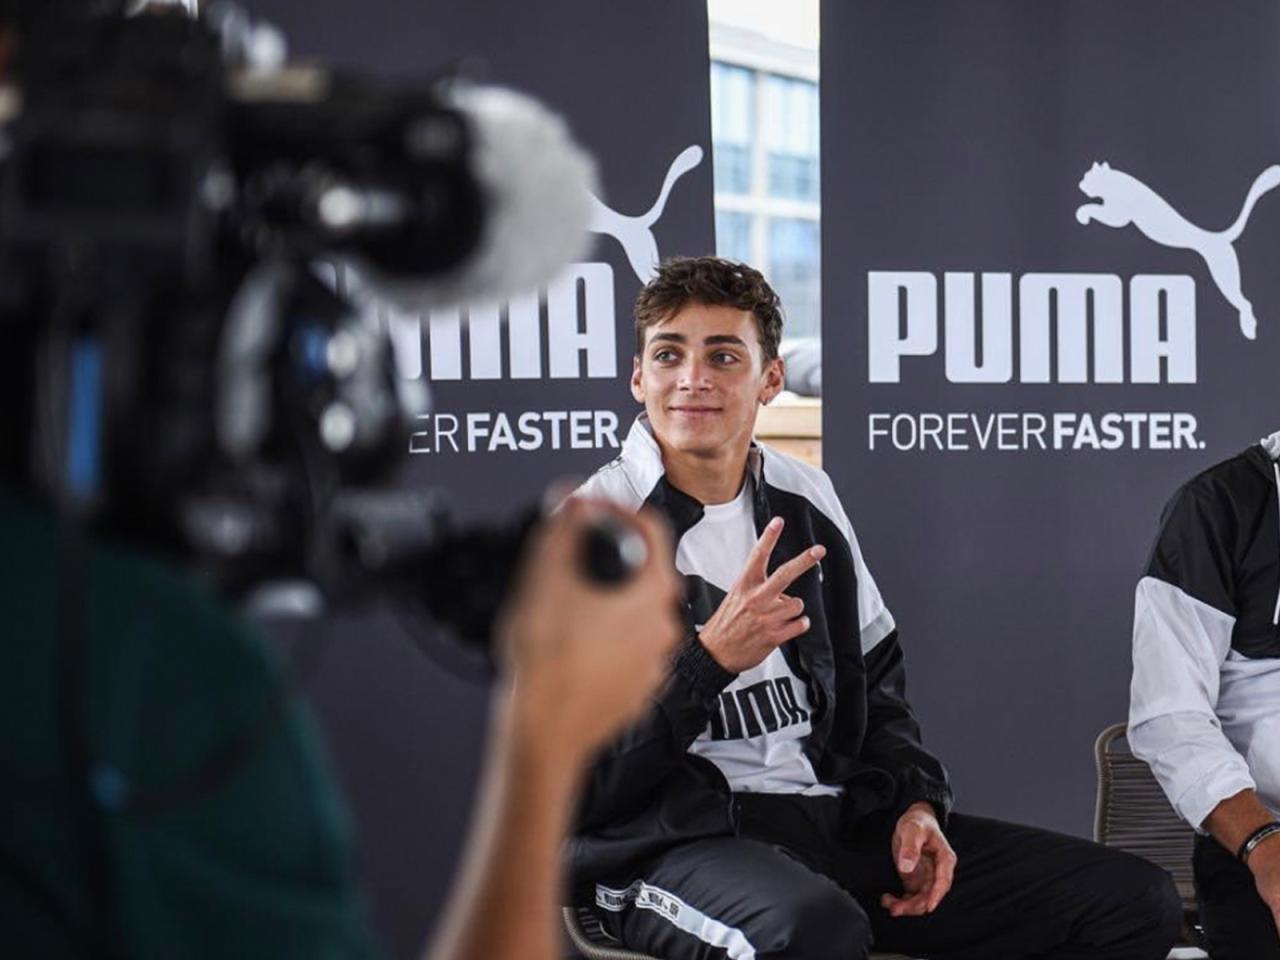 PUMA employee sitting in front of cameras